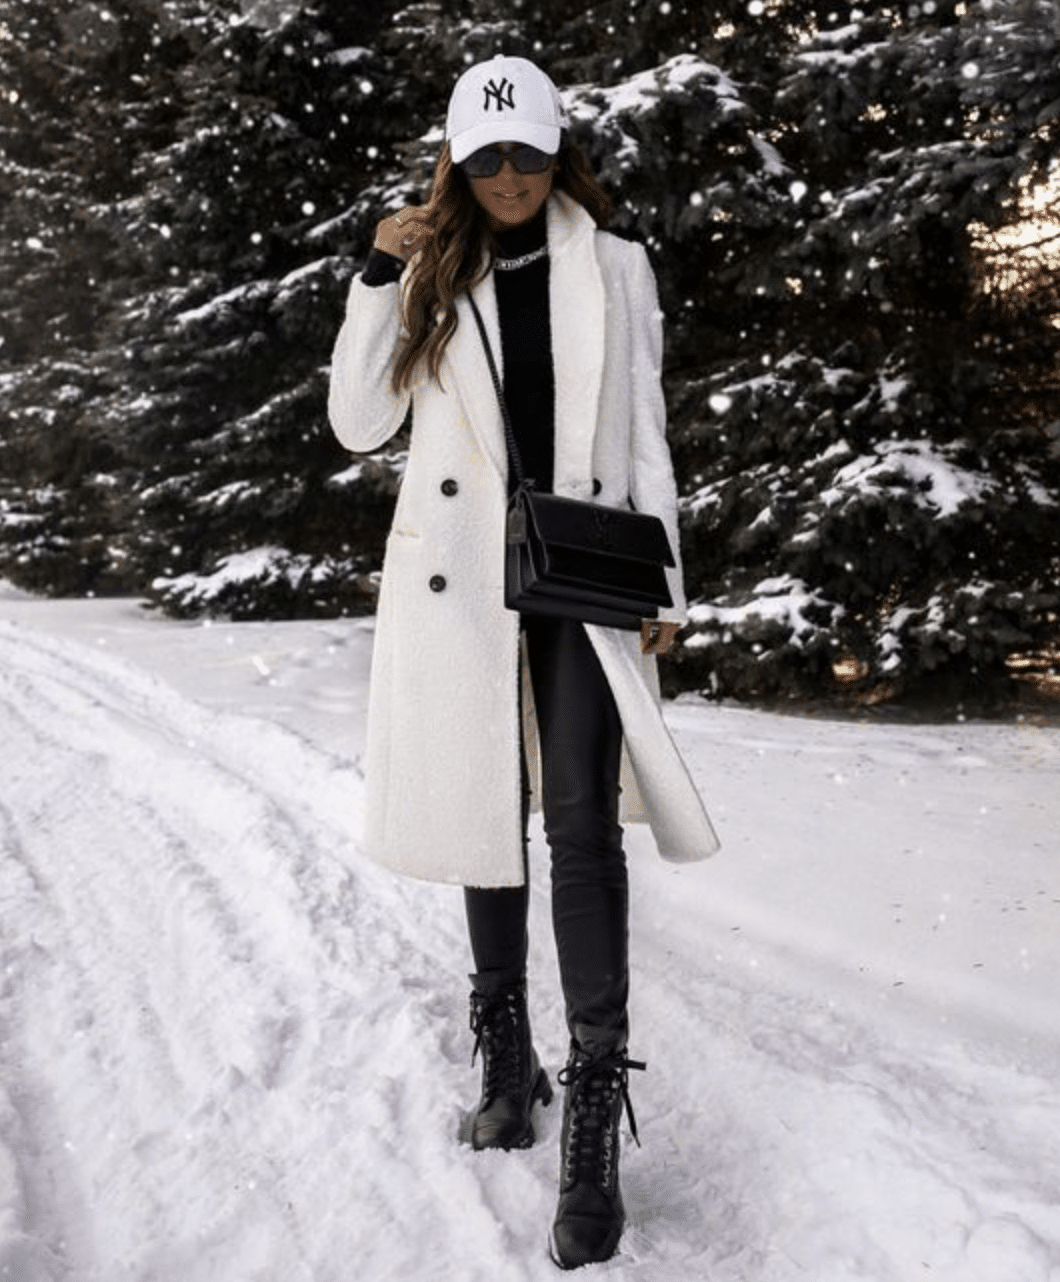 white coat and cap ski trip outfit